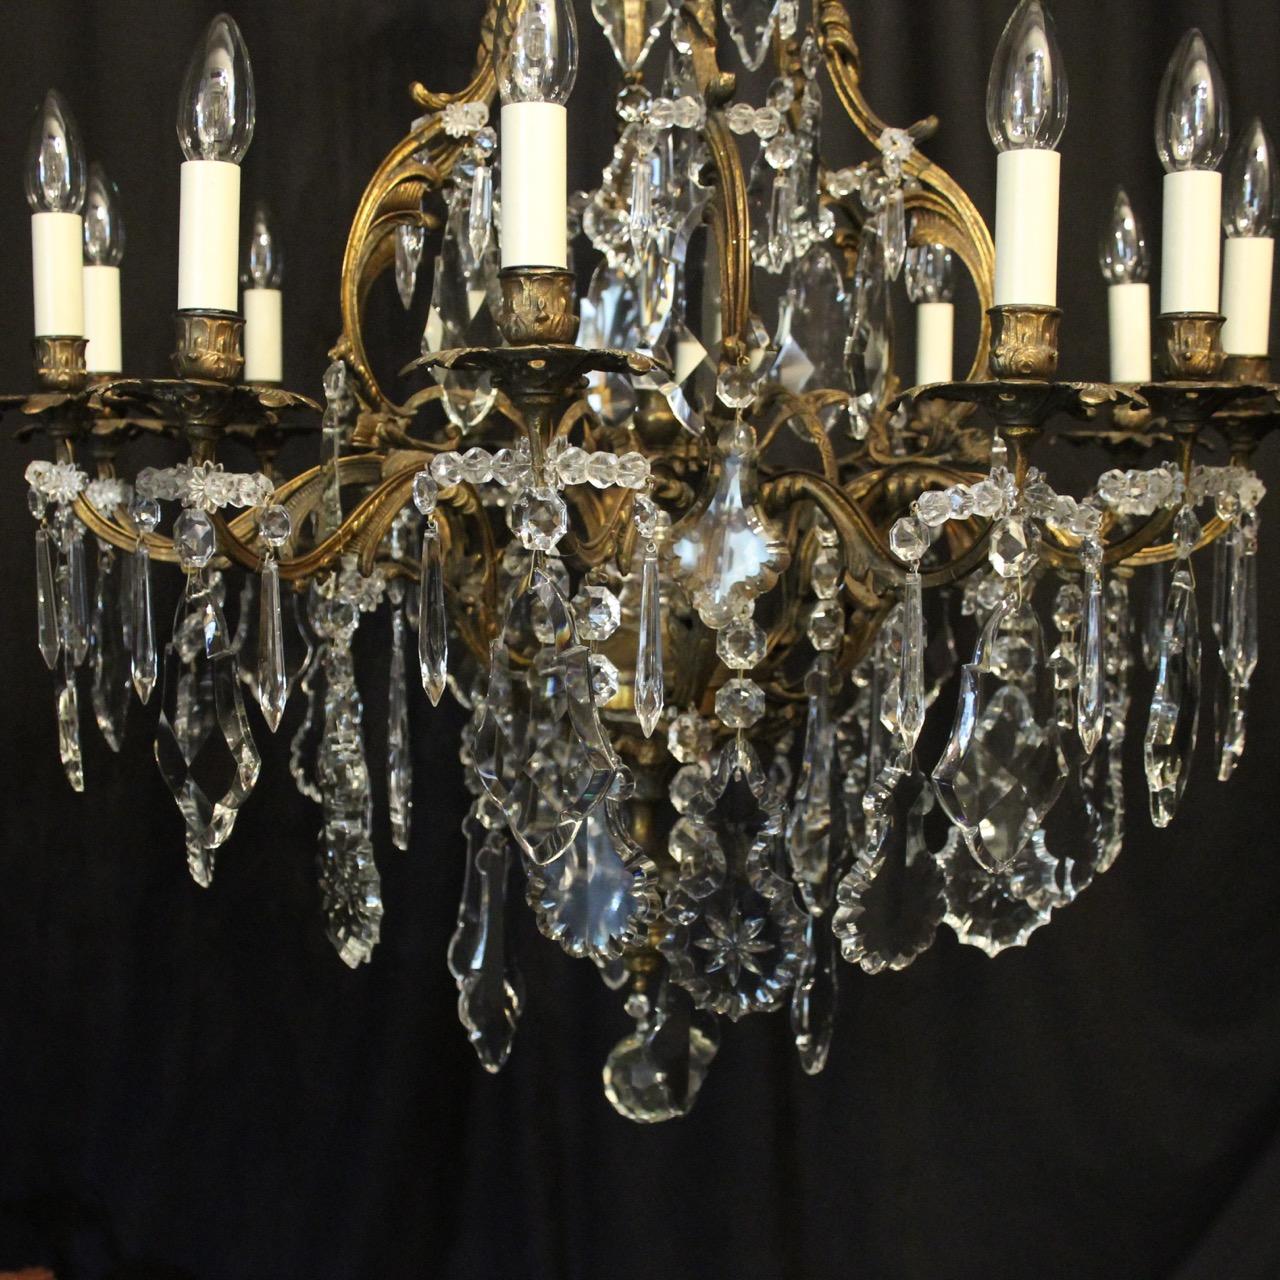 A French dark gilded bronze and crystal 12 light birdcage form antique chandelier, the leaf clad reeded scrolling arms with ornate bobeche drip pans and leaf bulbous candle sconces, issuing from an foliated cage form interior with a large prismatic